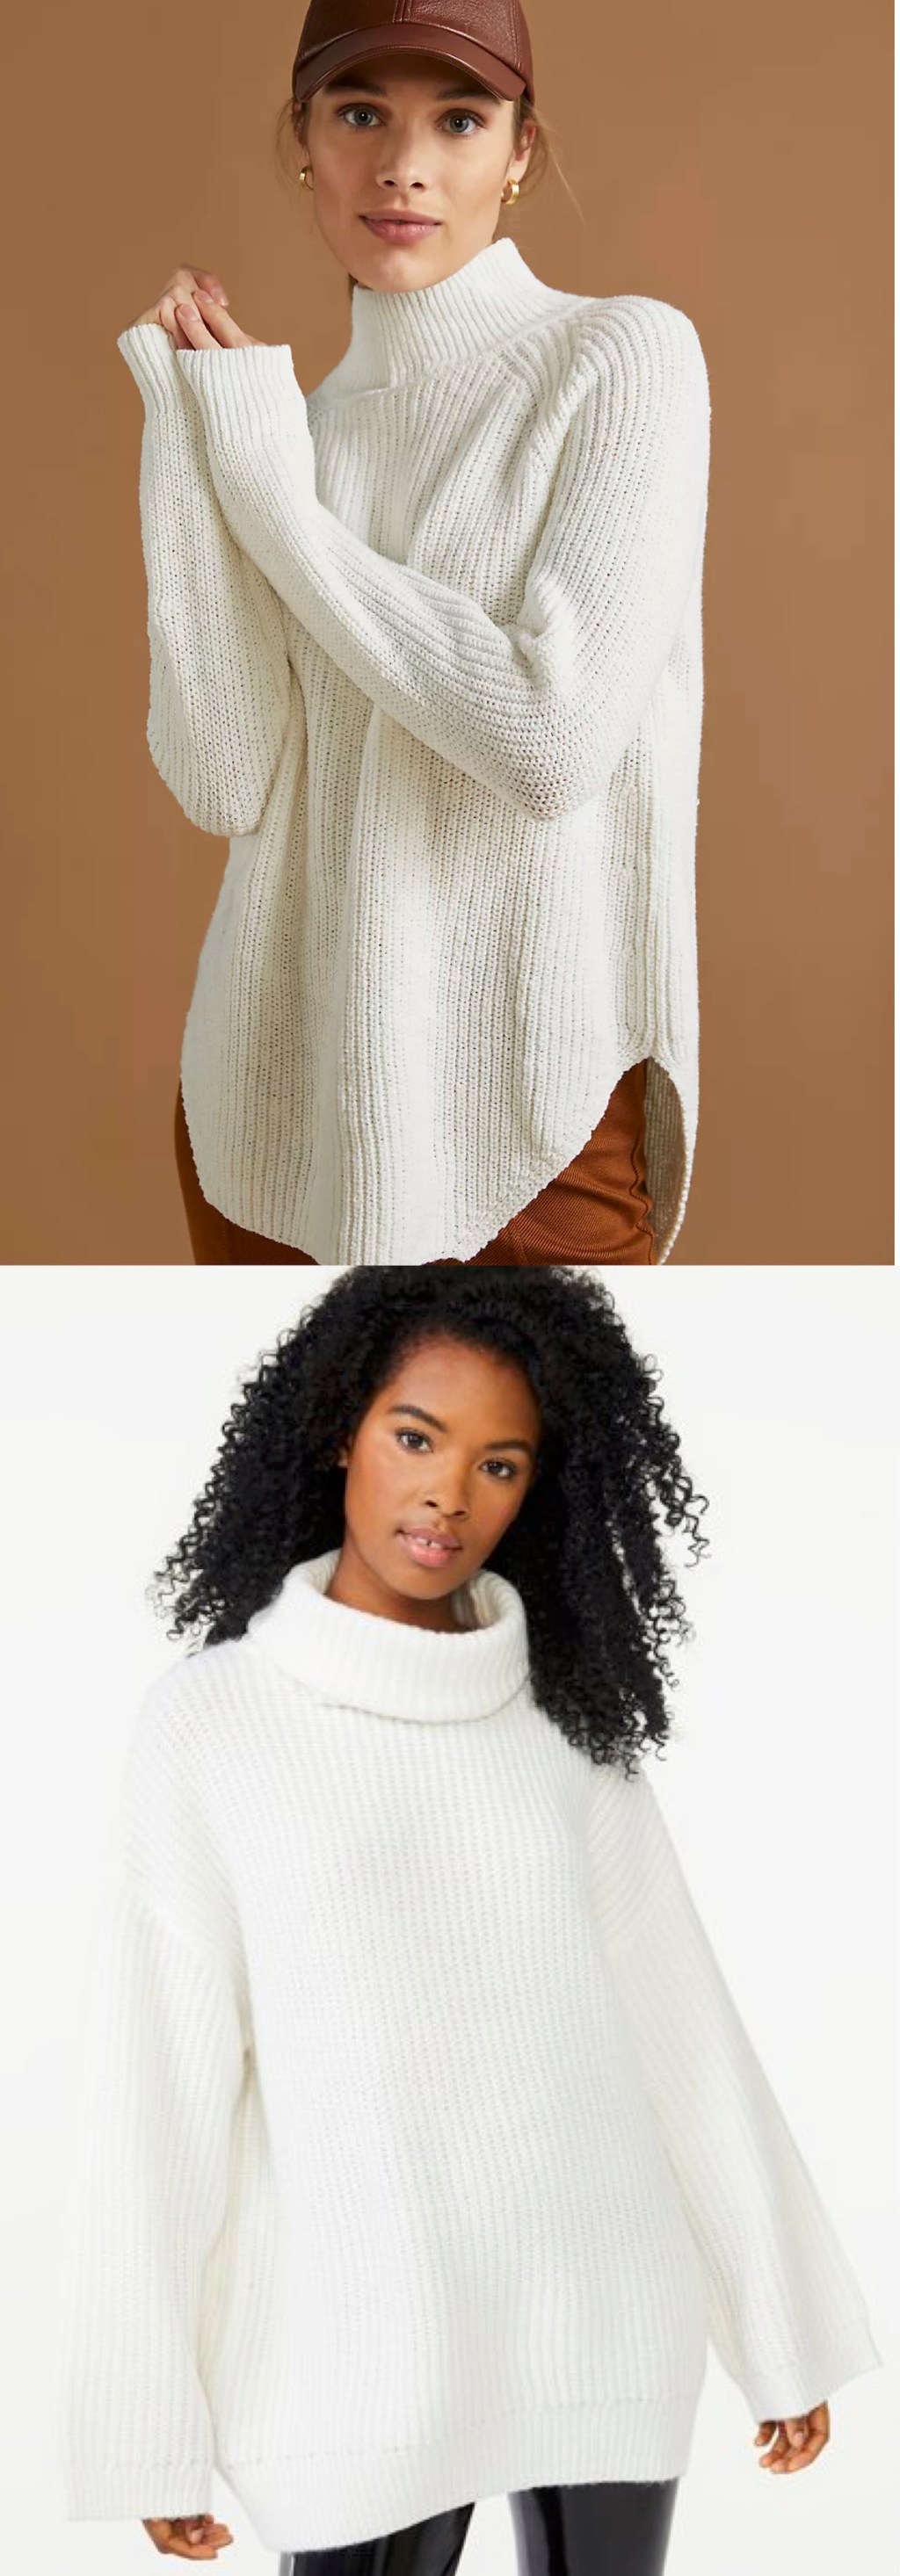 two woman modeling white cable knit turtleneck sweaters